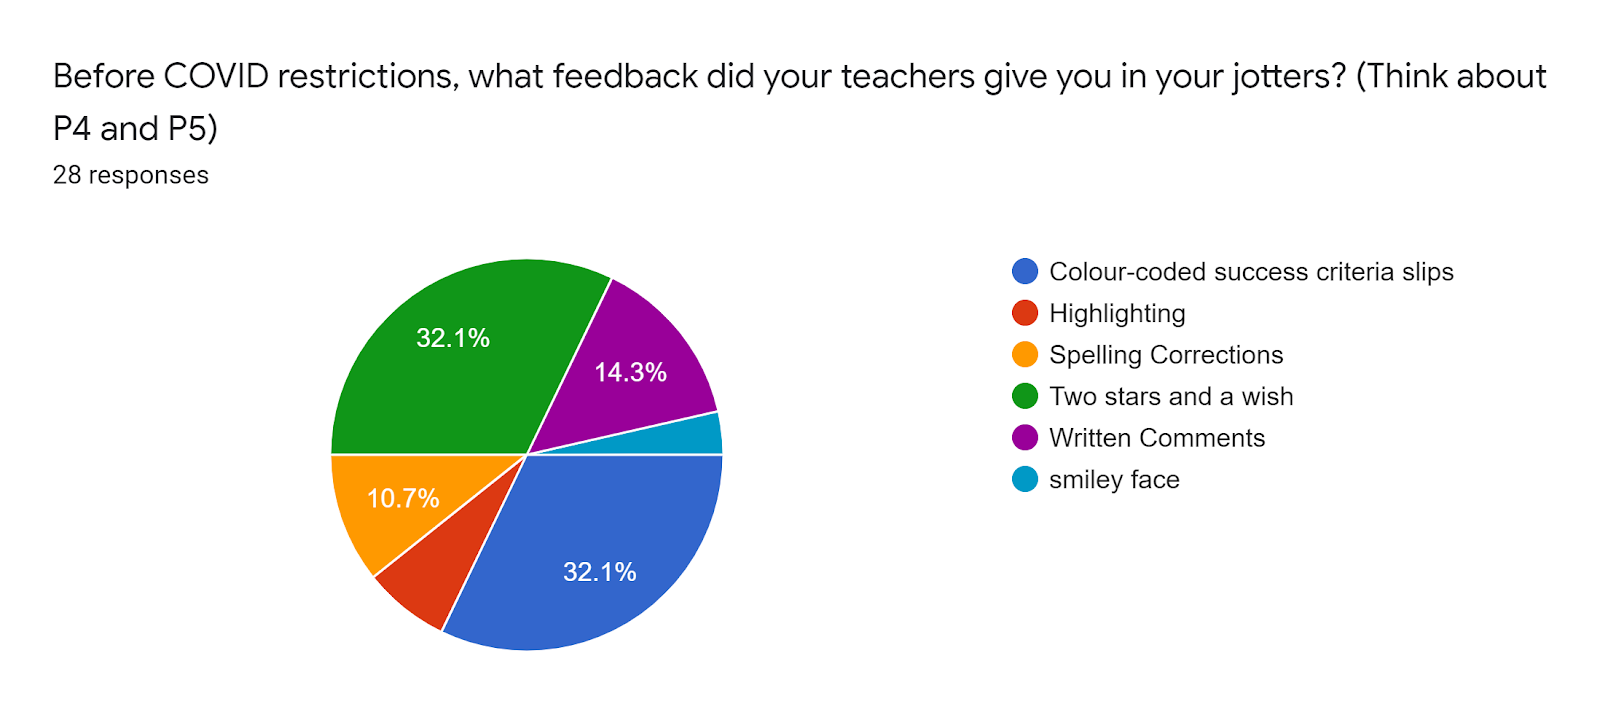 Forms response chart. Question title: Before COVID restrictions, what feedback did your teachers give you in your jotters? (Think about P4 and P5). Number of responses: 28 responses.